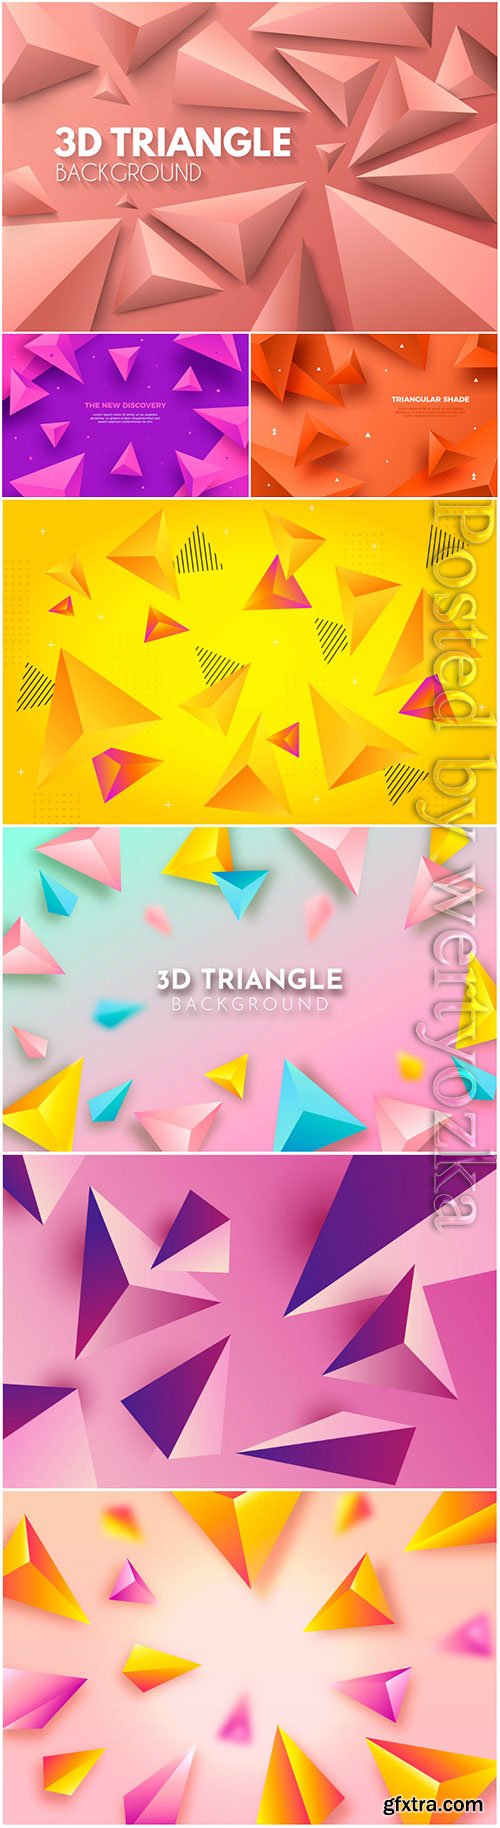 3d background with colorful abstract vector elements